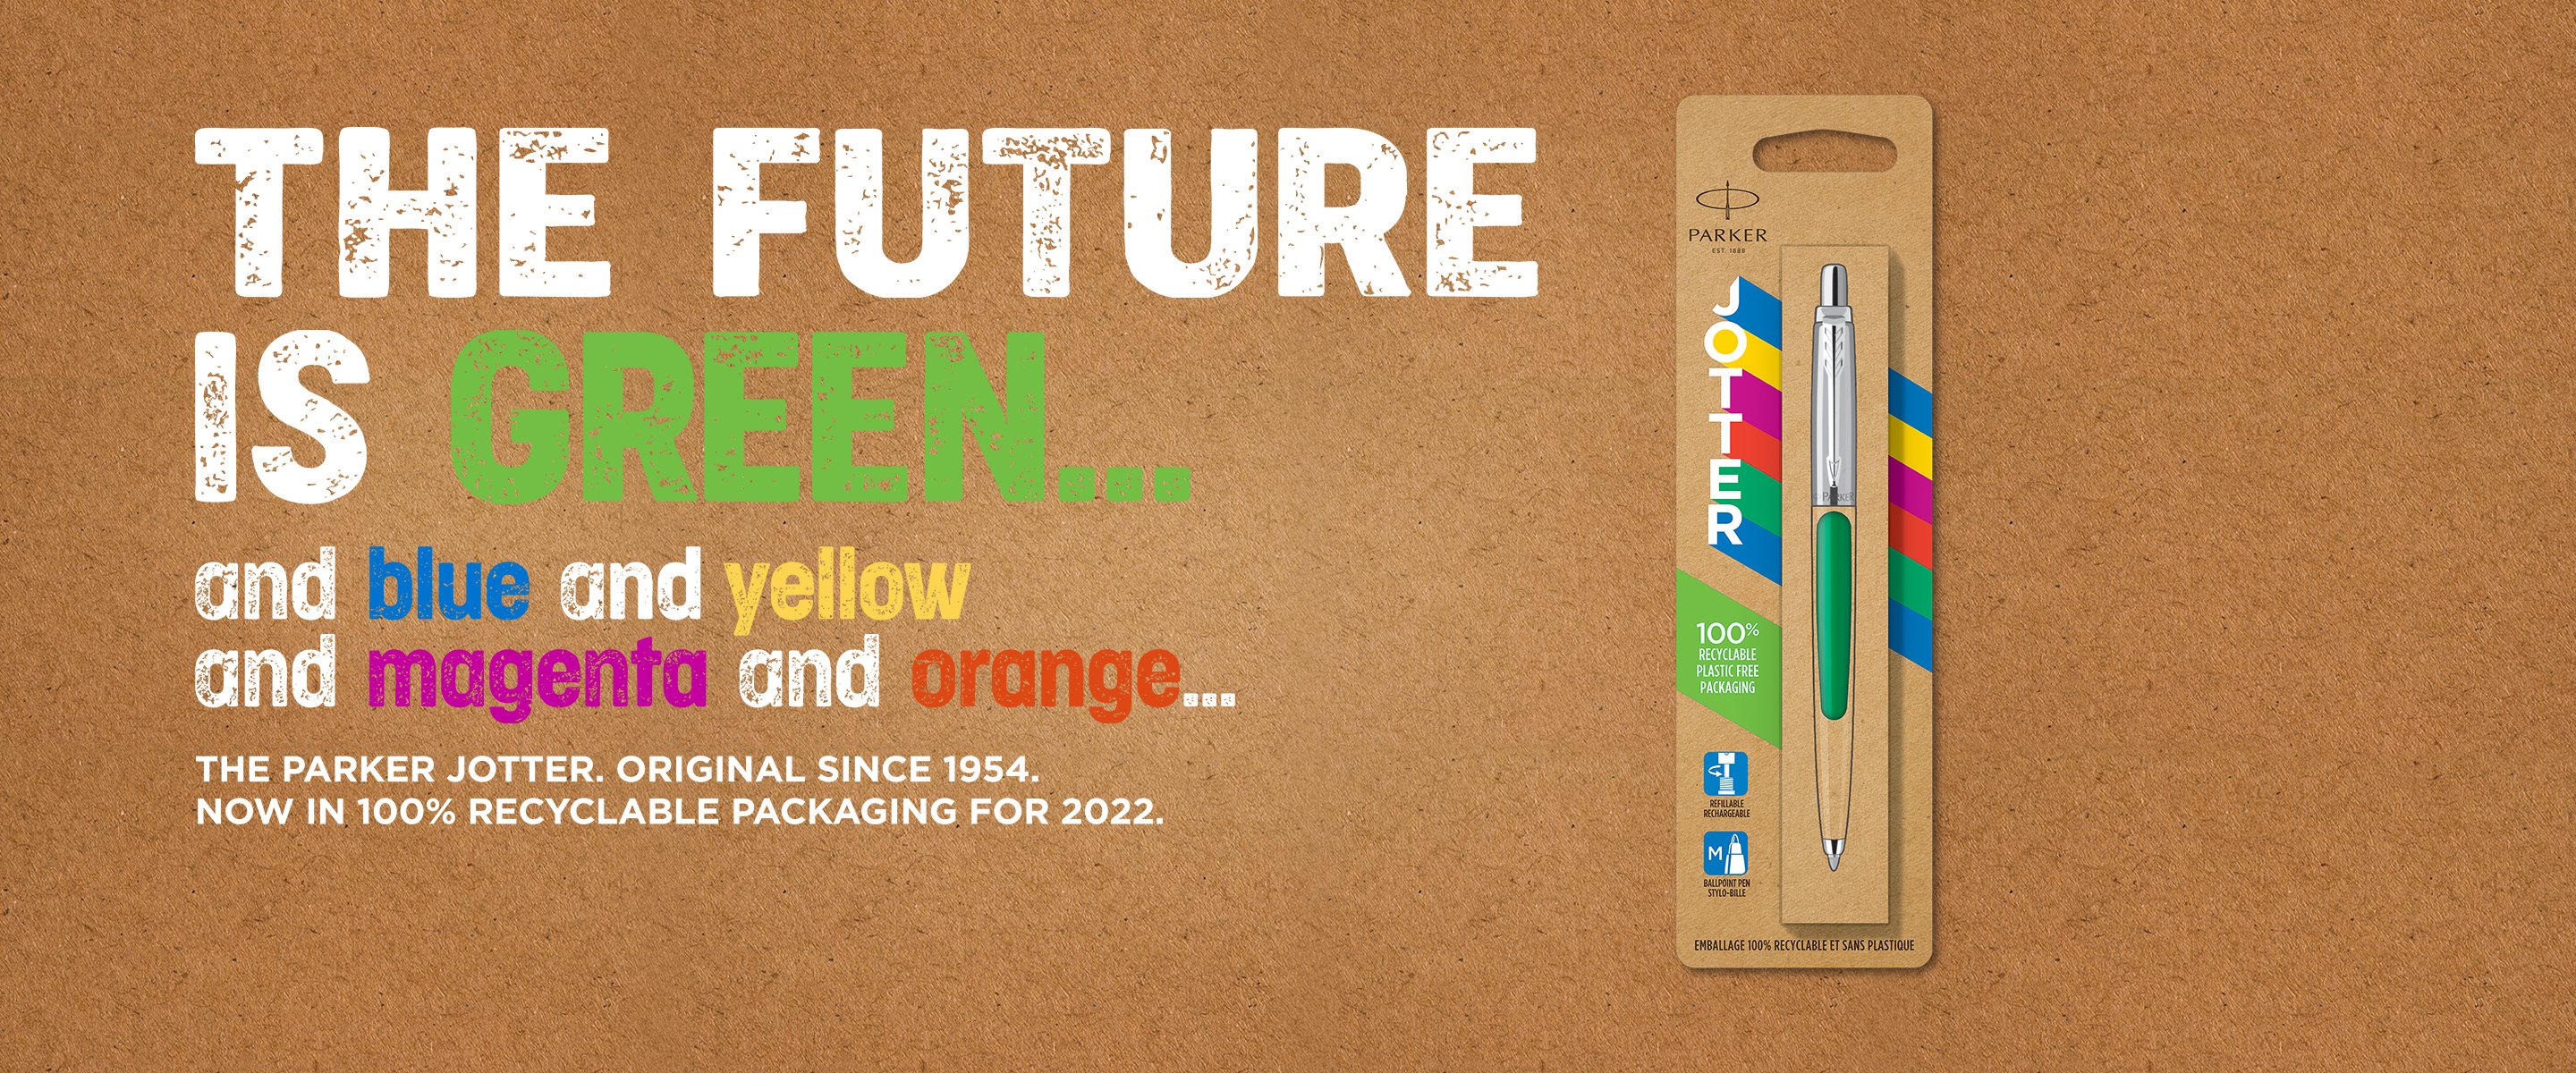 The future is green and blue and yellow and magenta and orange the parker jotter original since 1954